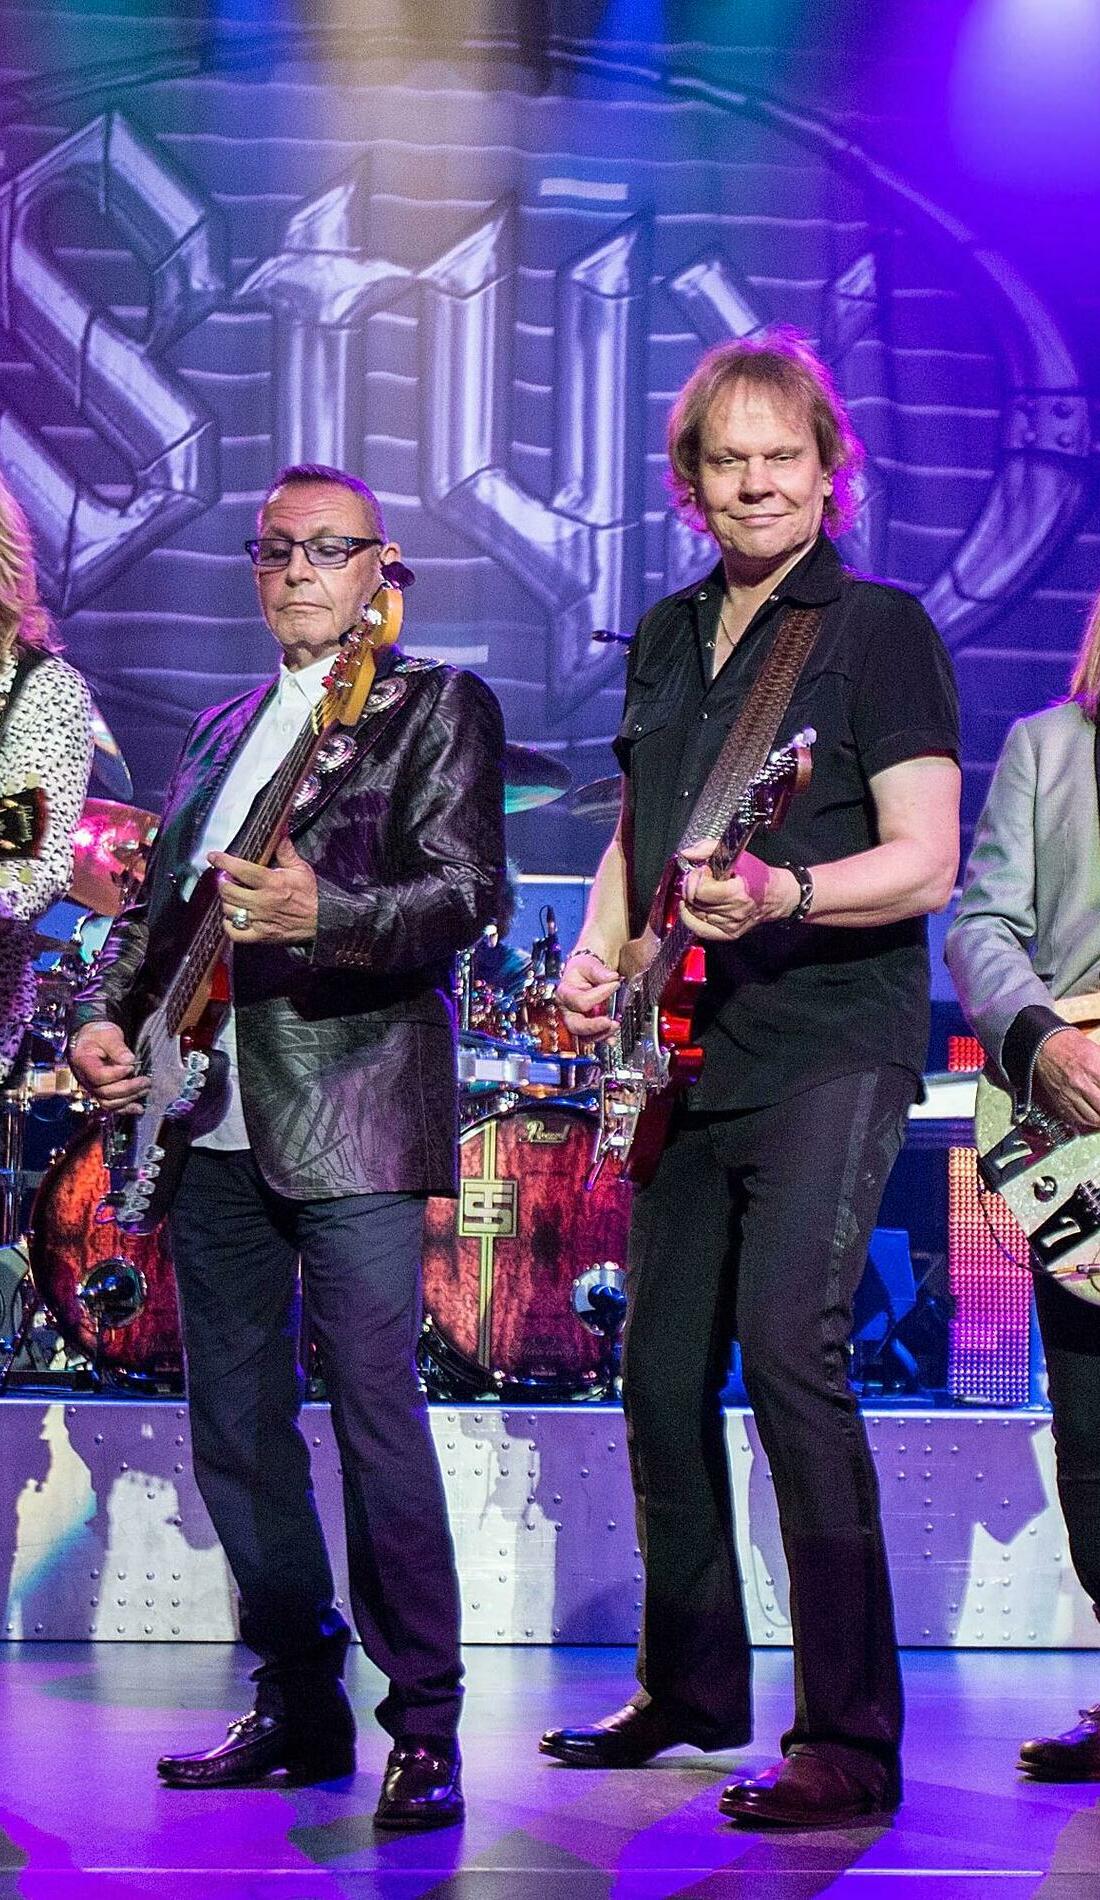 A Styx live event